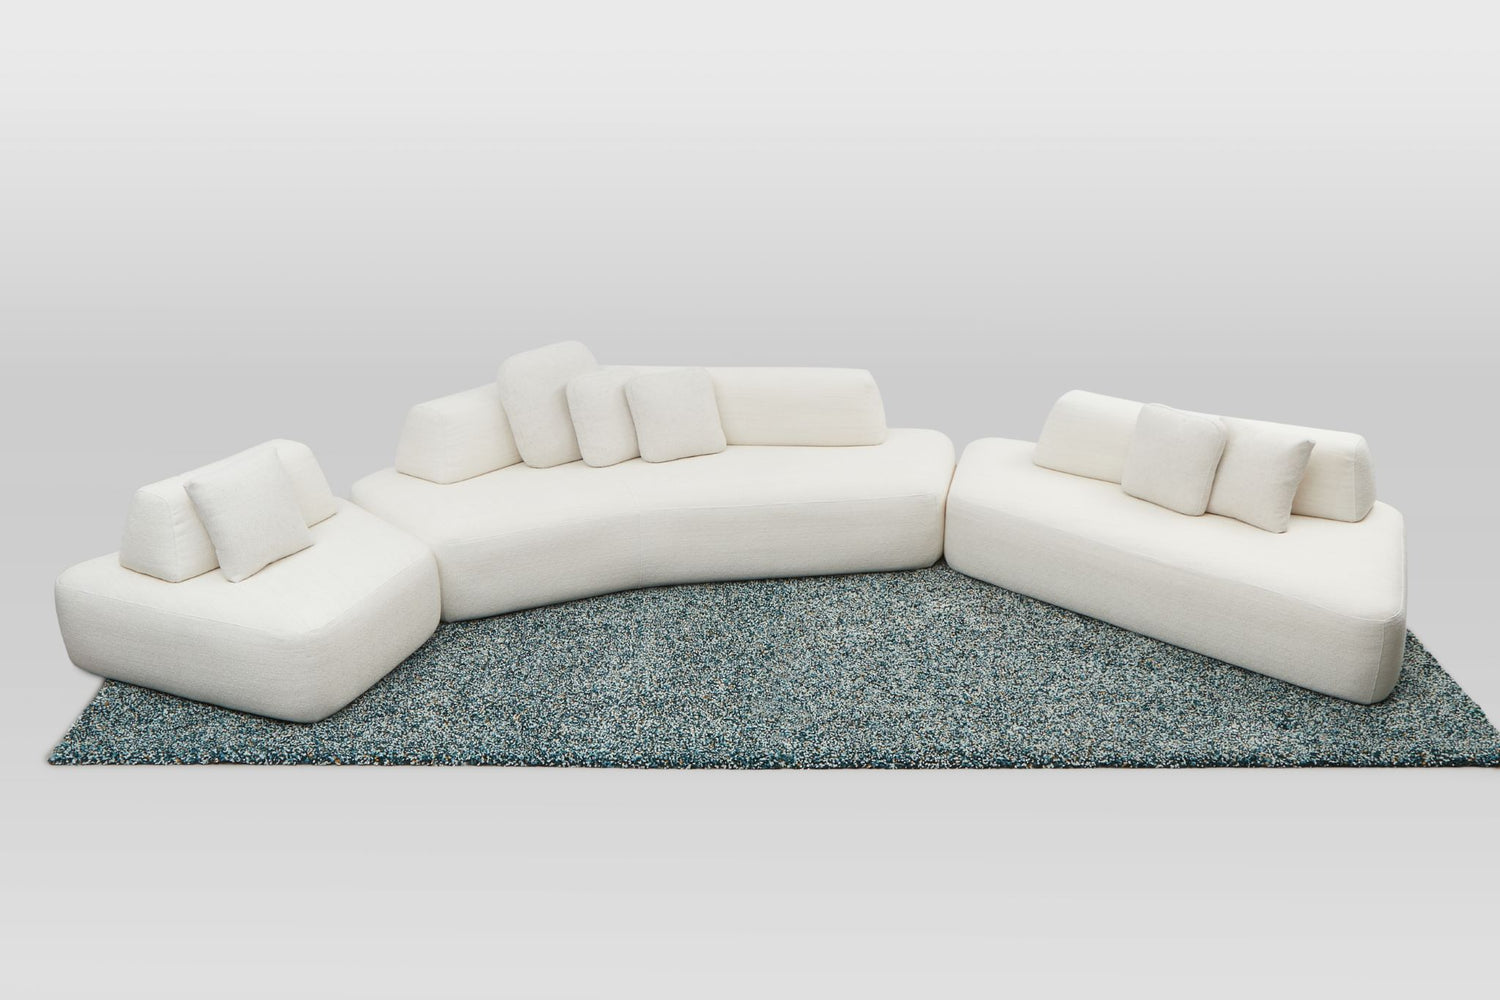 Hectare 7 seater with ottoman, boomerang and left wing modules in white.